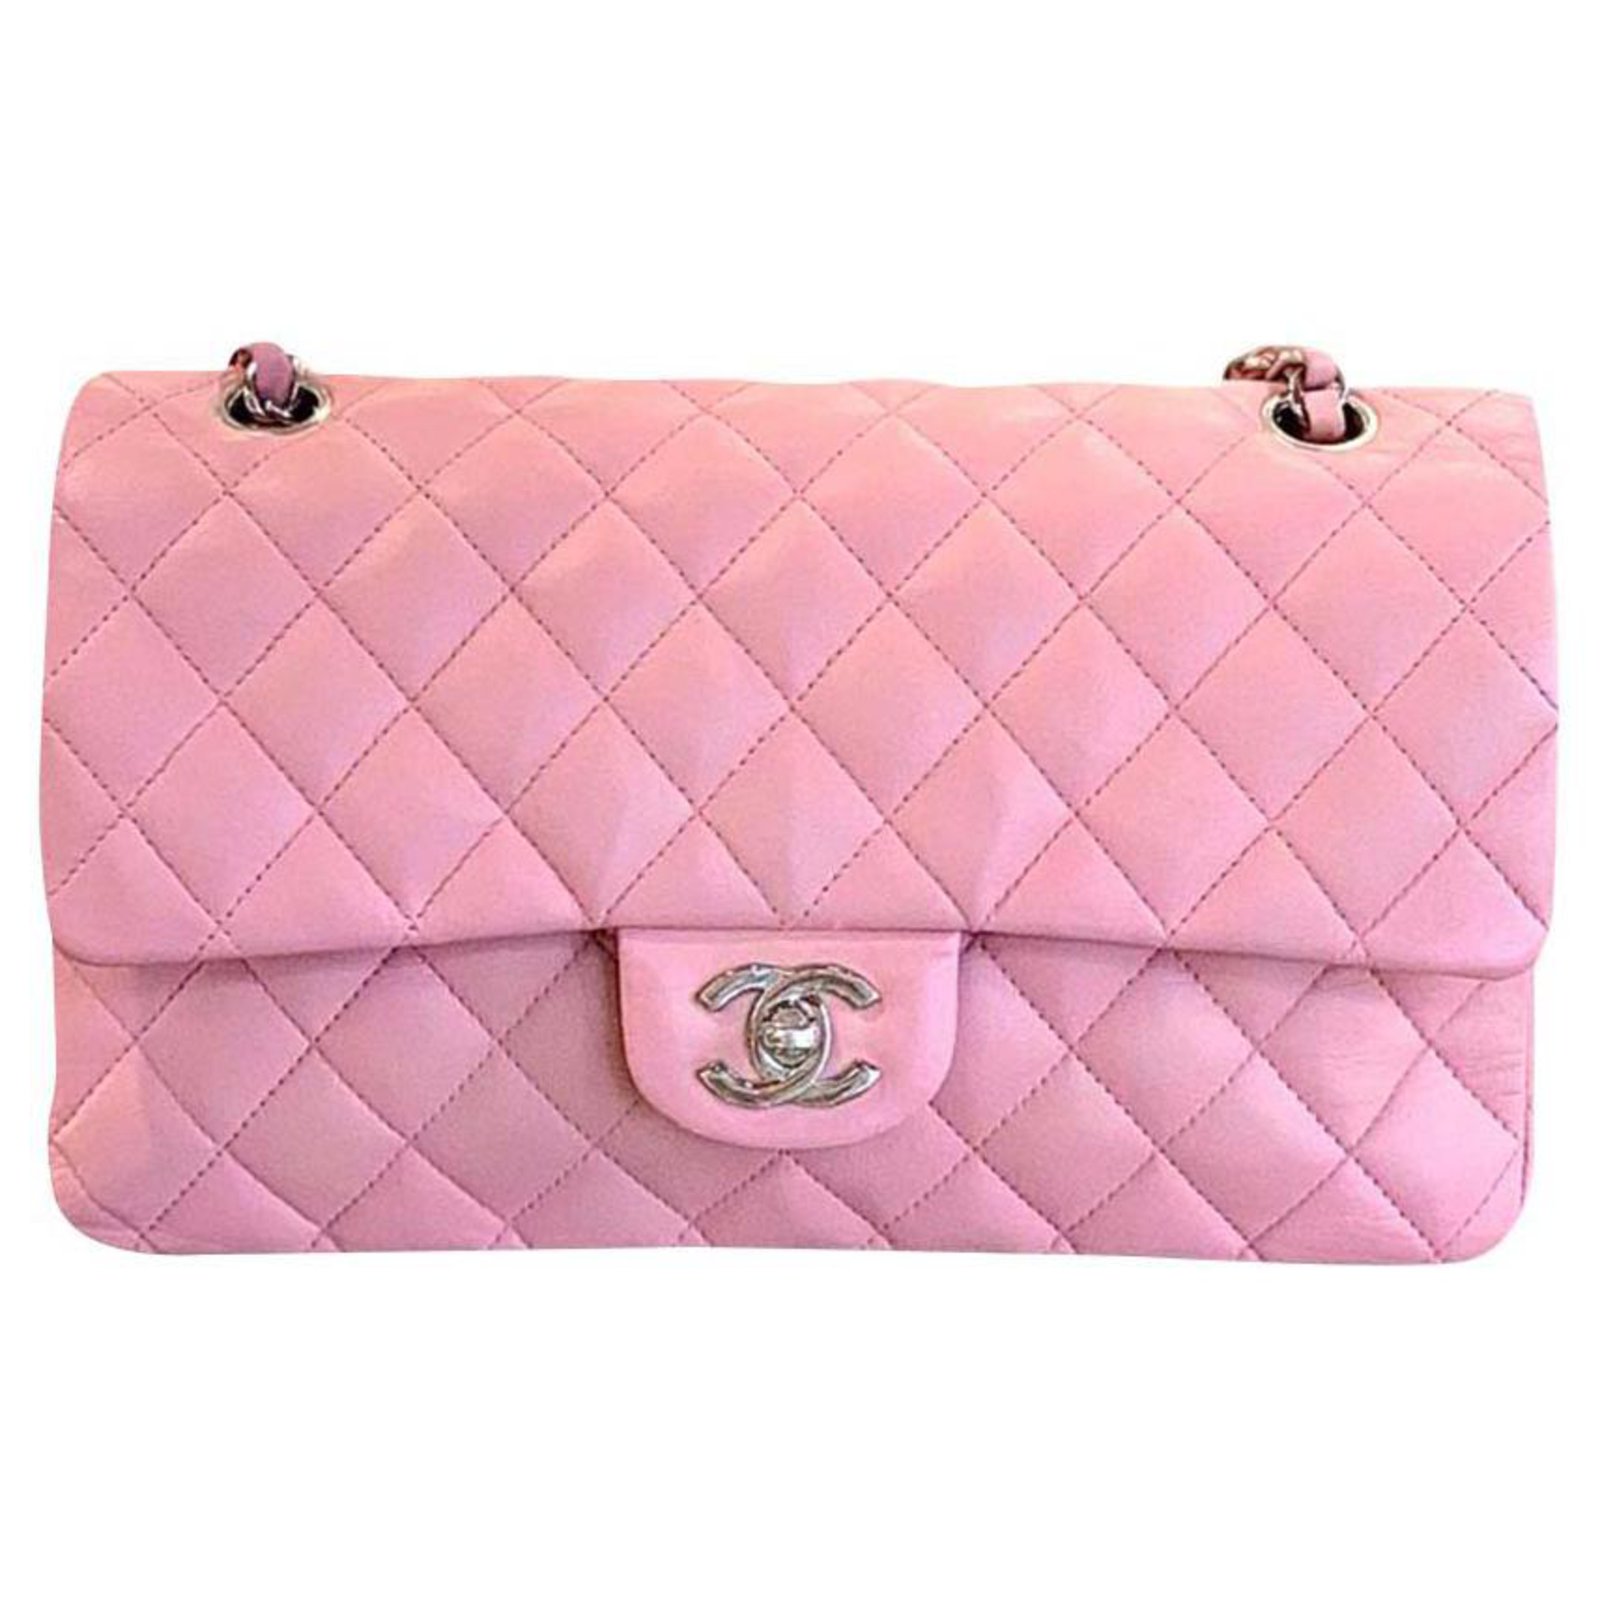 Timeless/classique leather handbag Chanel Pink in Leather - 31777629